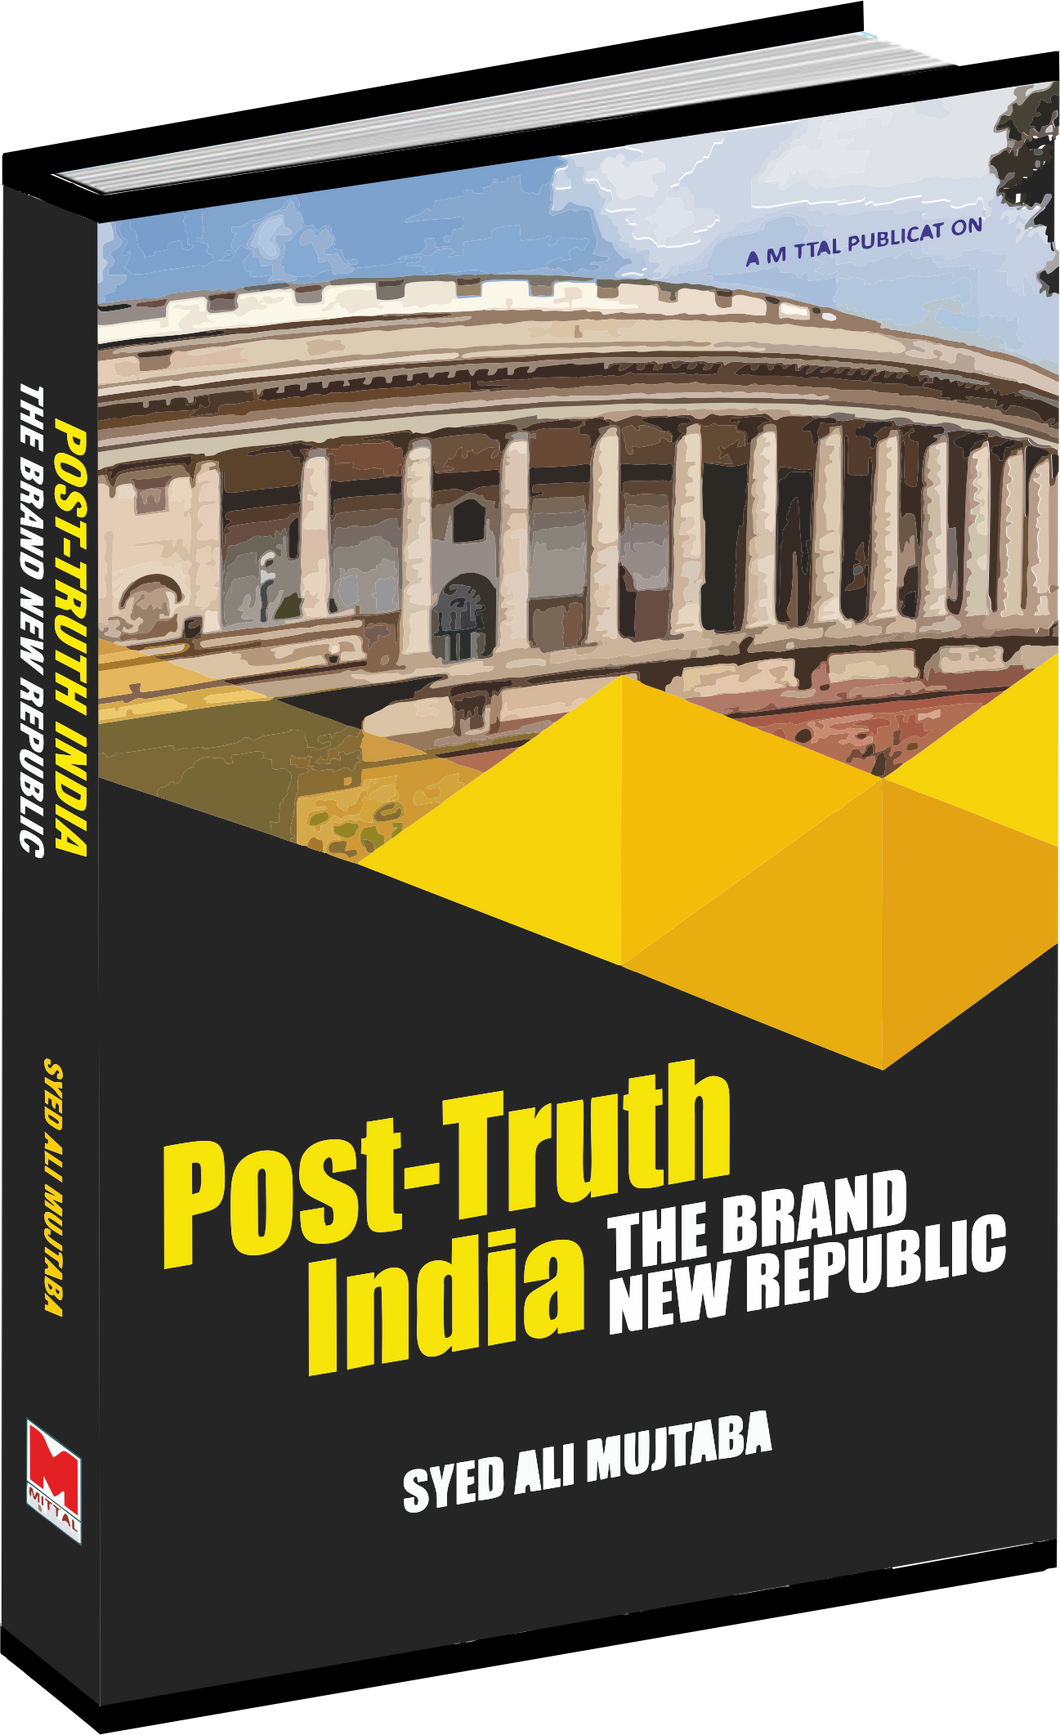 Post-Truth India: The Brand New Republic by Syed Ali Mujtaba